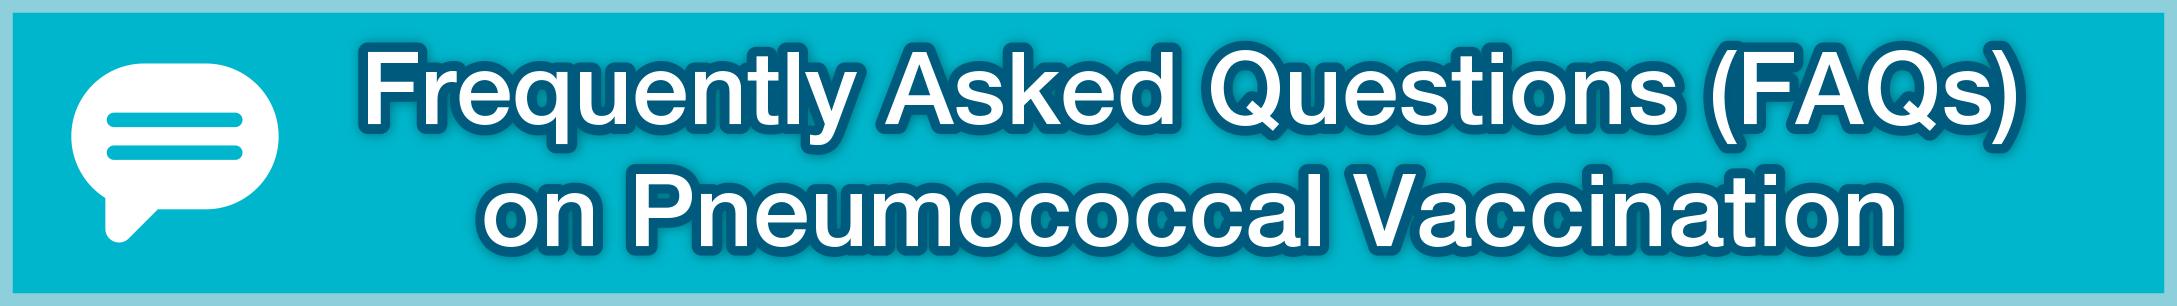 Frequently Asked Questions (FAQs) on Pneumococcal Vaccination